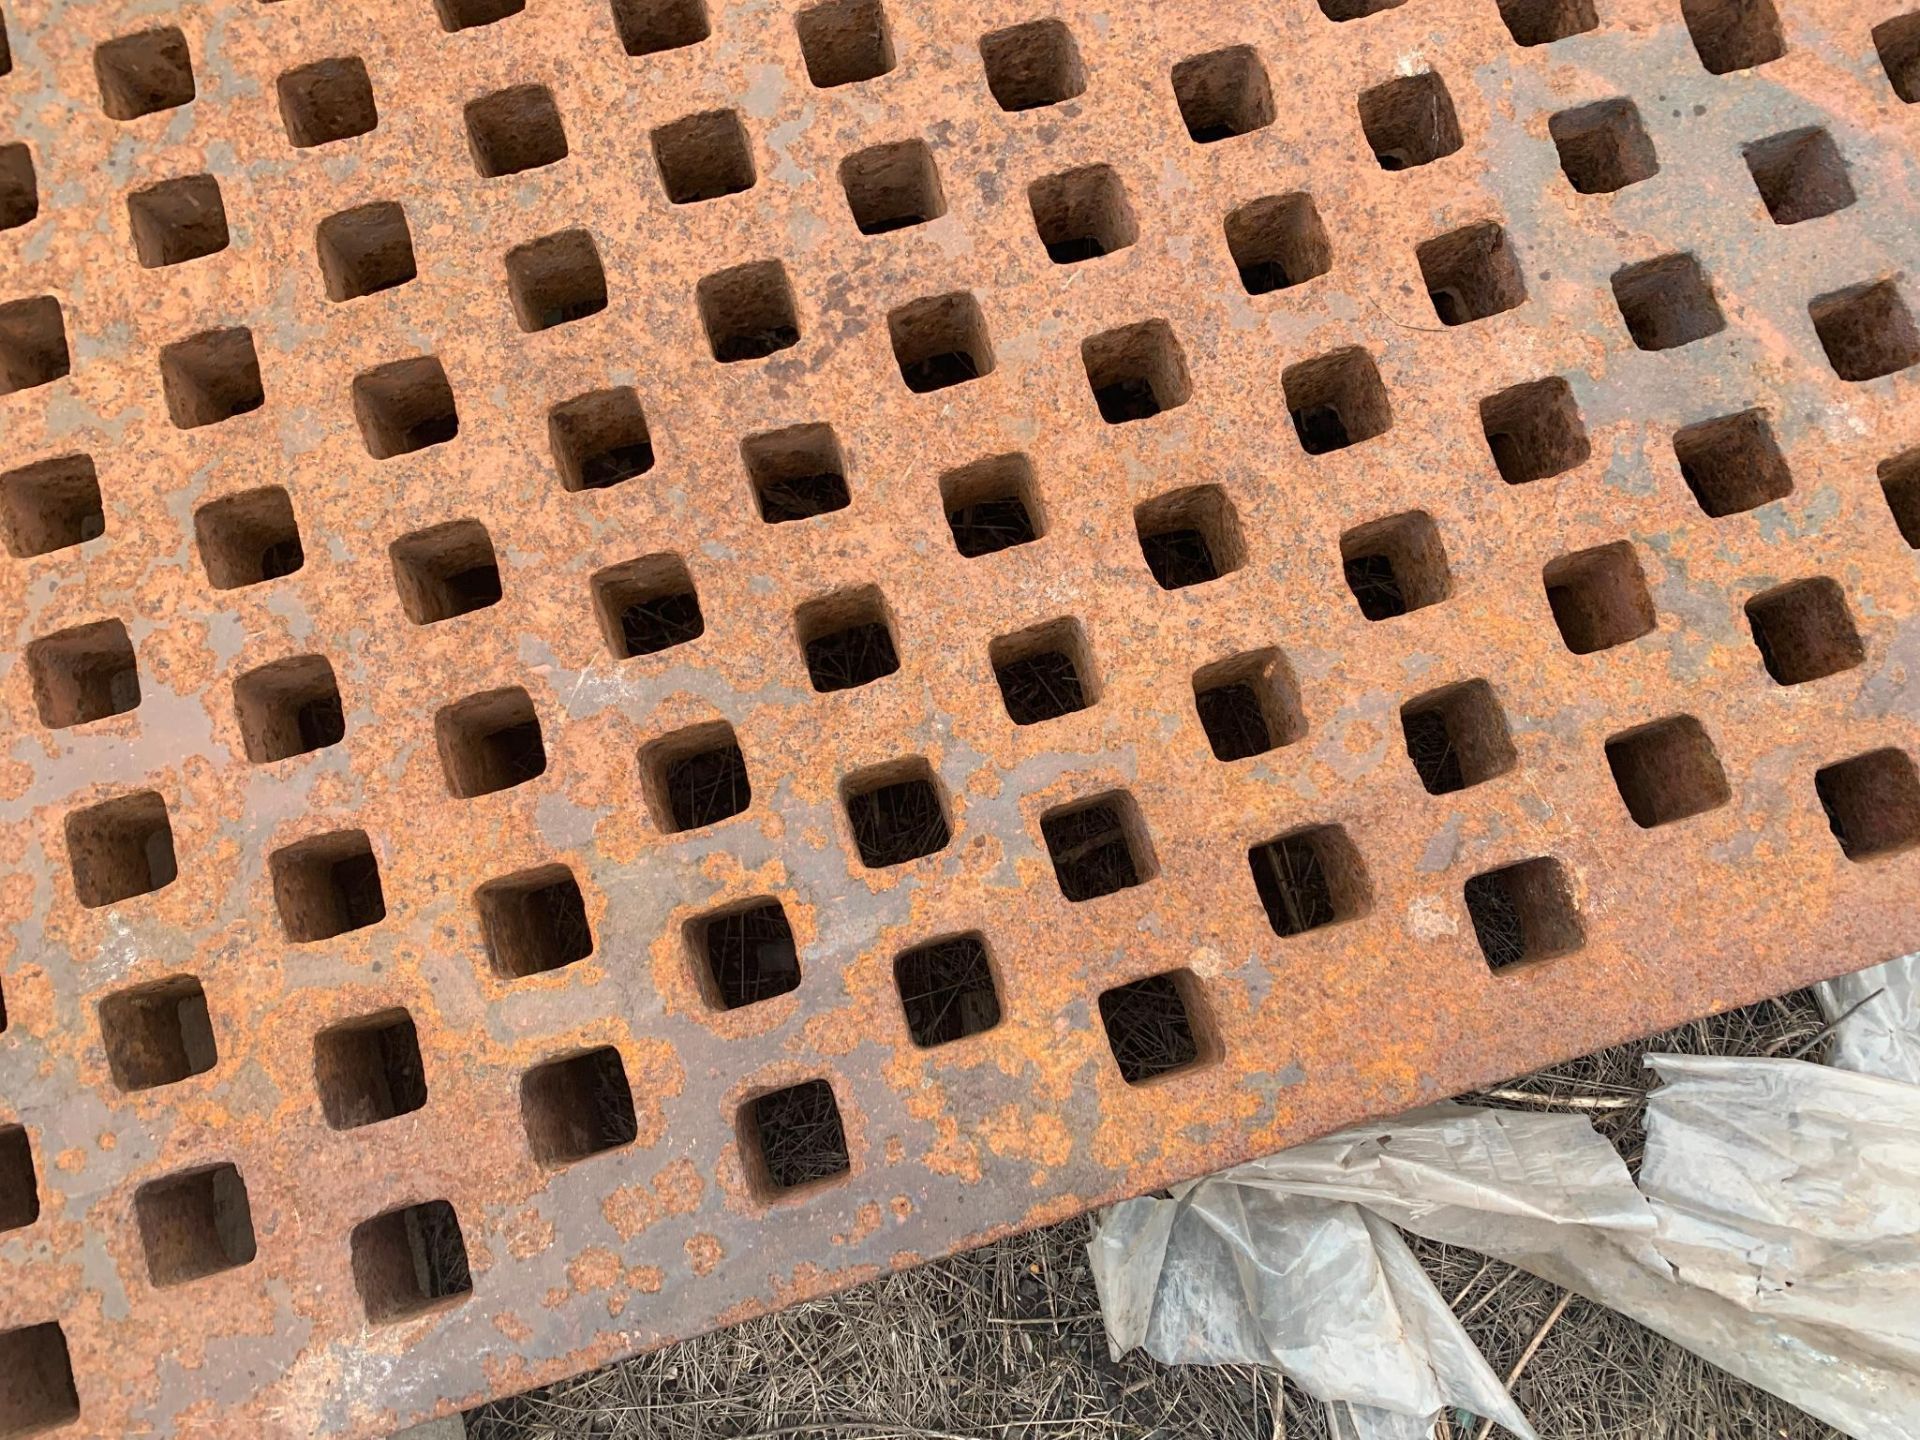 Acorn Style Welding Platen. Approx 61.5" x 61.5" x 5.25" deep with 2" square holes. Note: Small crac - Image 17 of 33